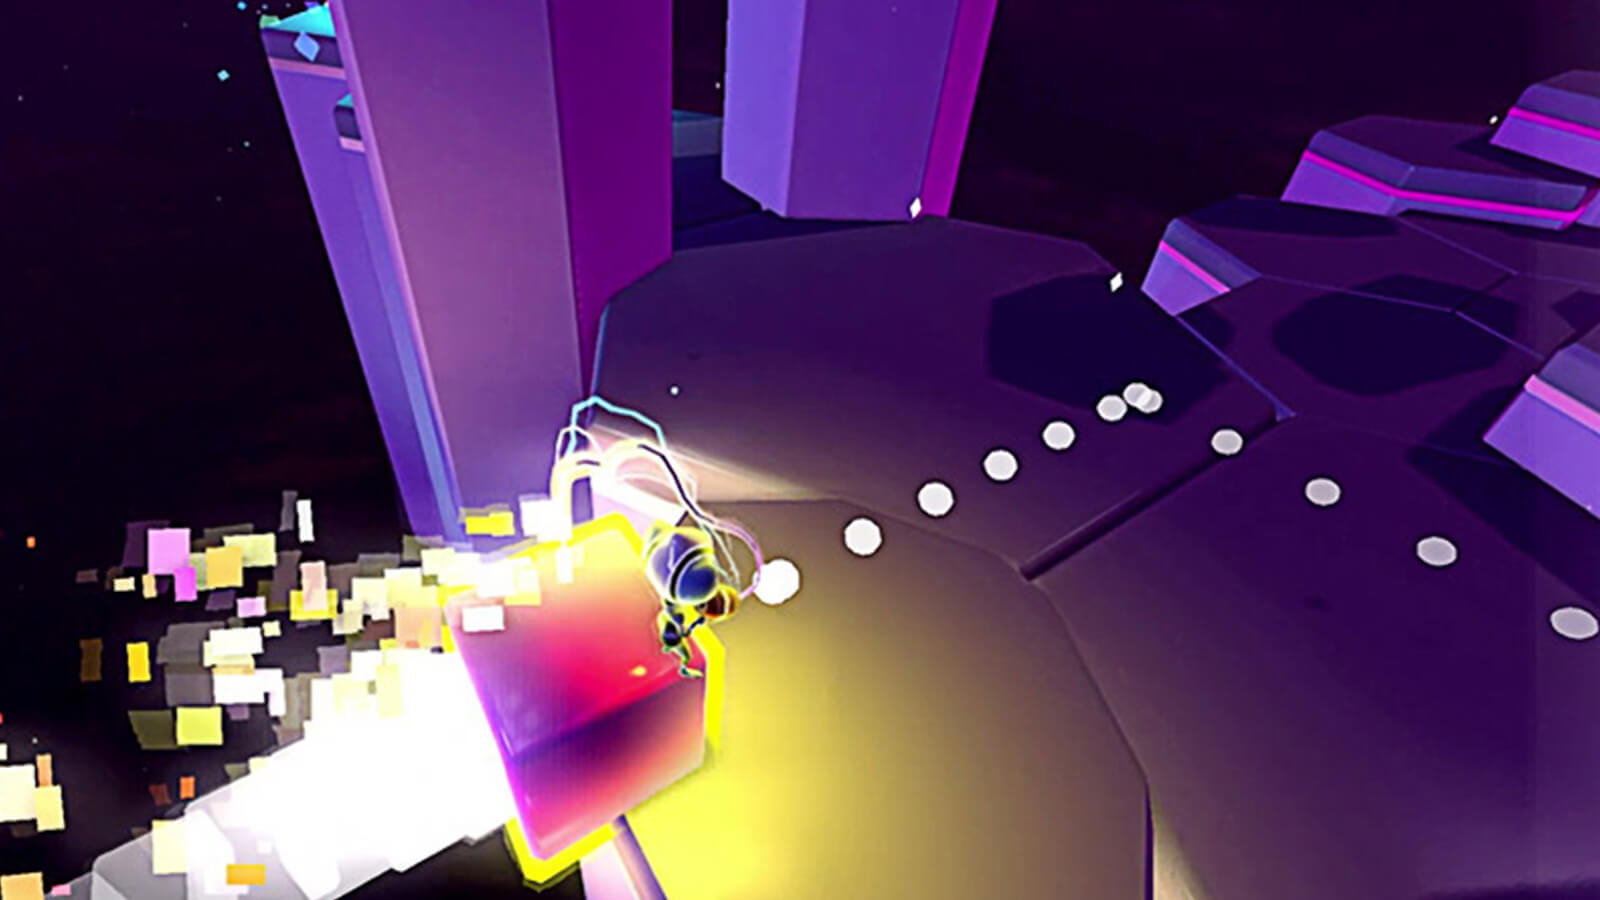 The player's character is propelled forward on a block as white spheres appear in front of it